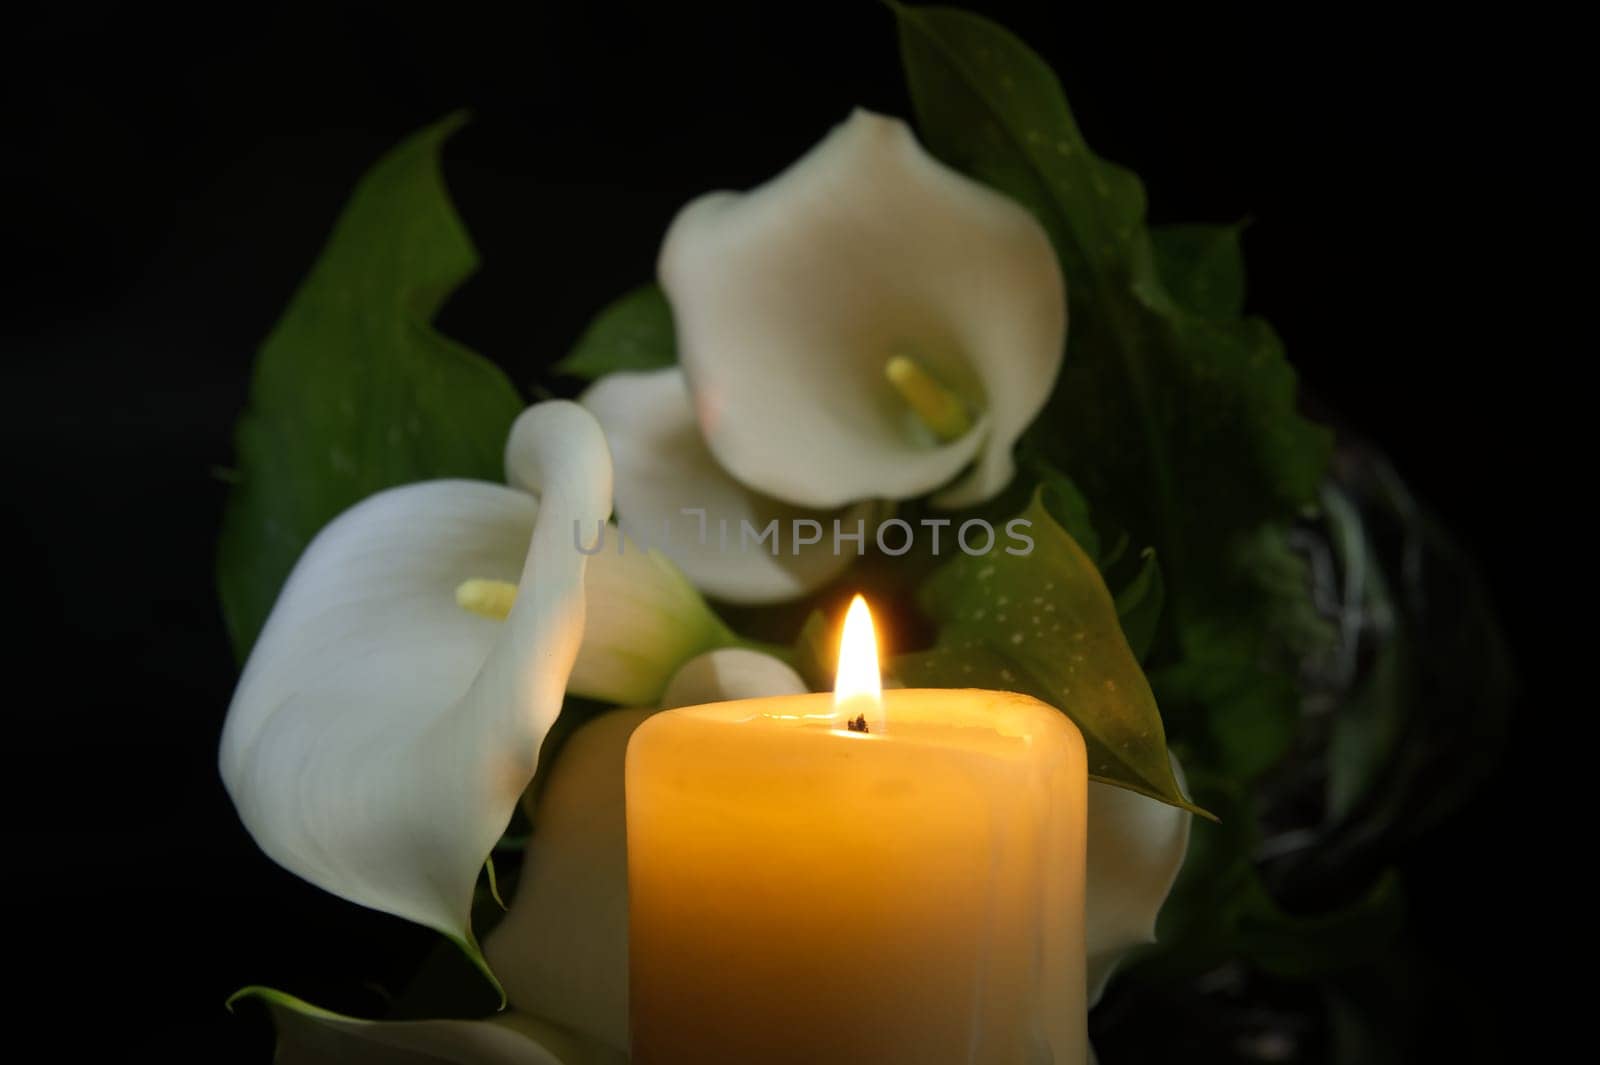 White calla lily flower next to glowing candle flame casts a warm light in a dark environment and creates a soothing ambiance, radiating a sense of peaceful solitude